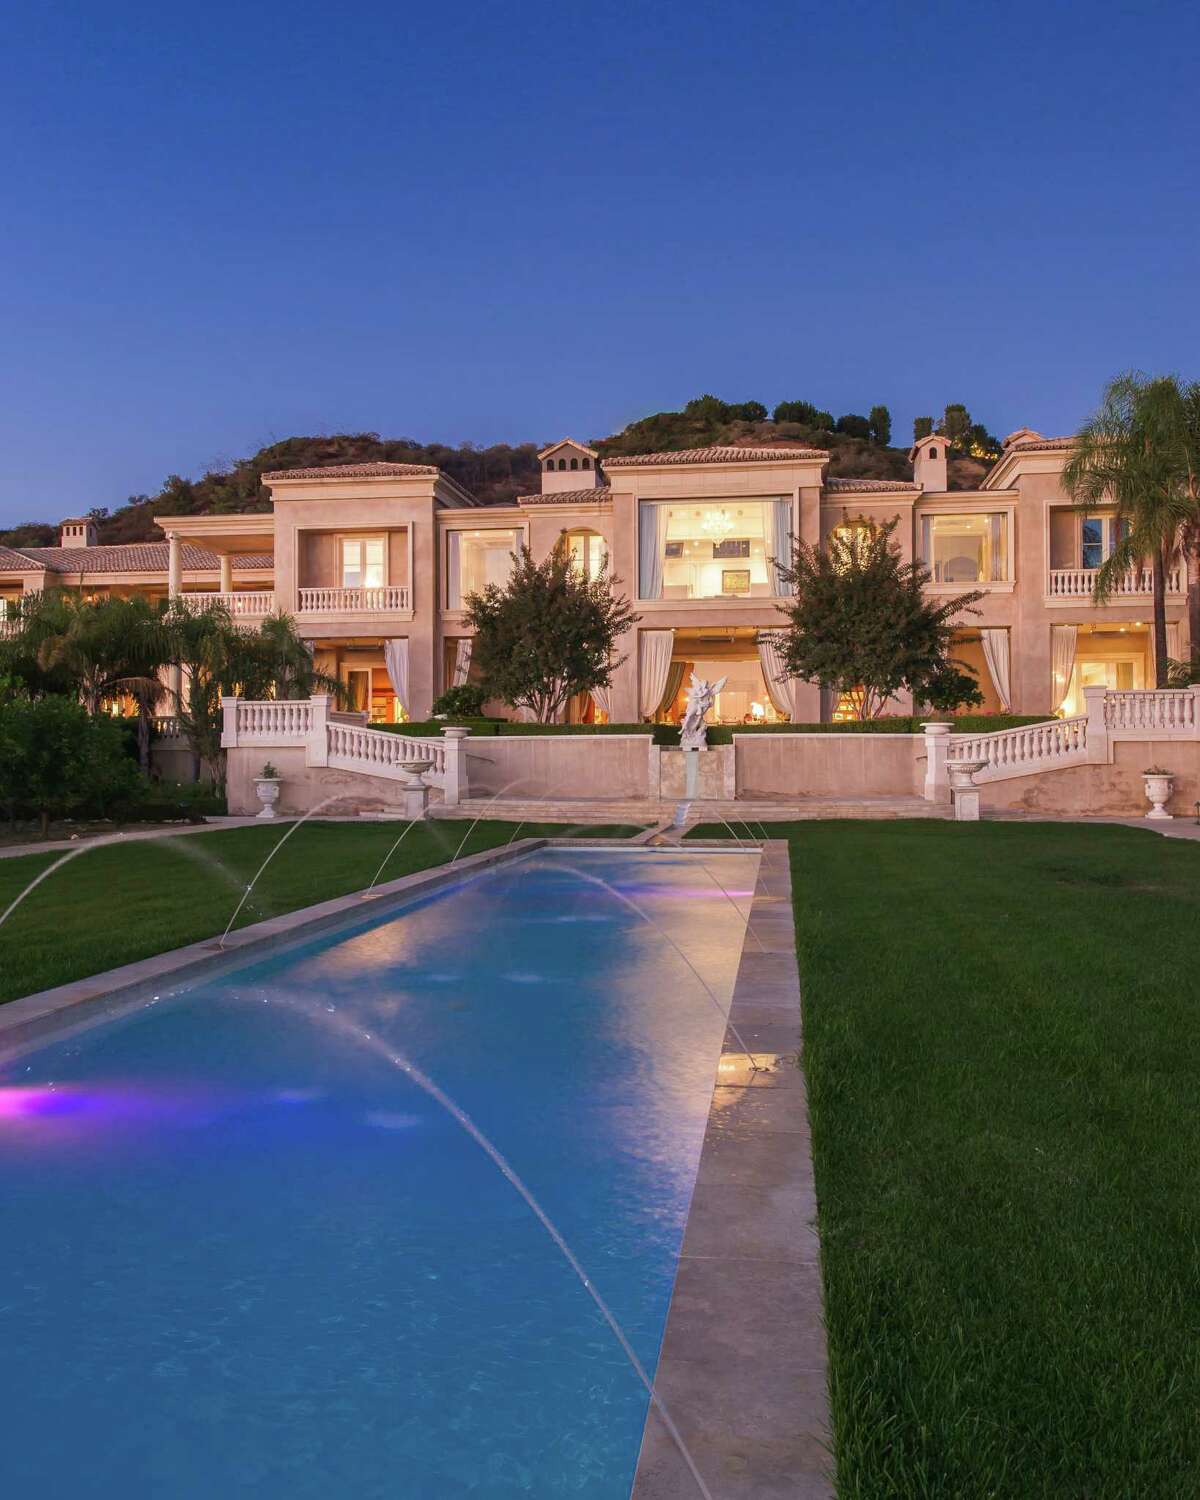 The 53,000-square-foot ‘Palazzo di Amore’ estate in southern California has 12 bedrooms and 23 bathrooms. It was listed at $195 million in 2014.